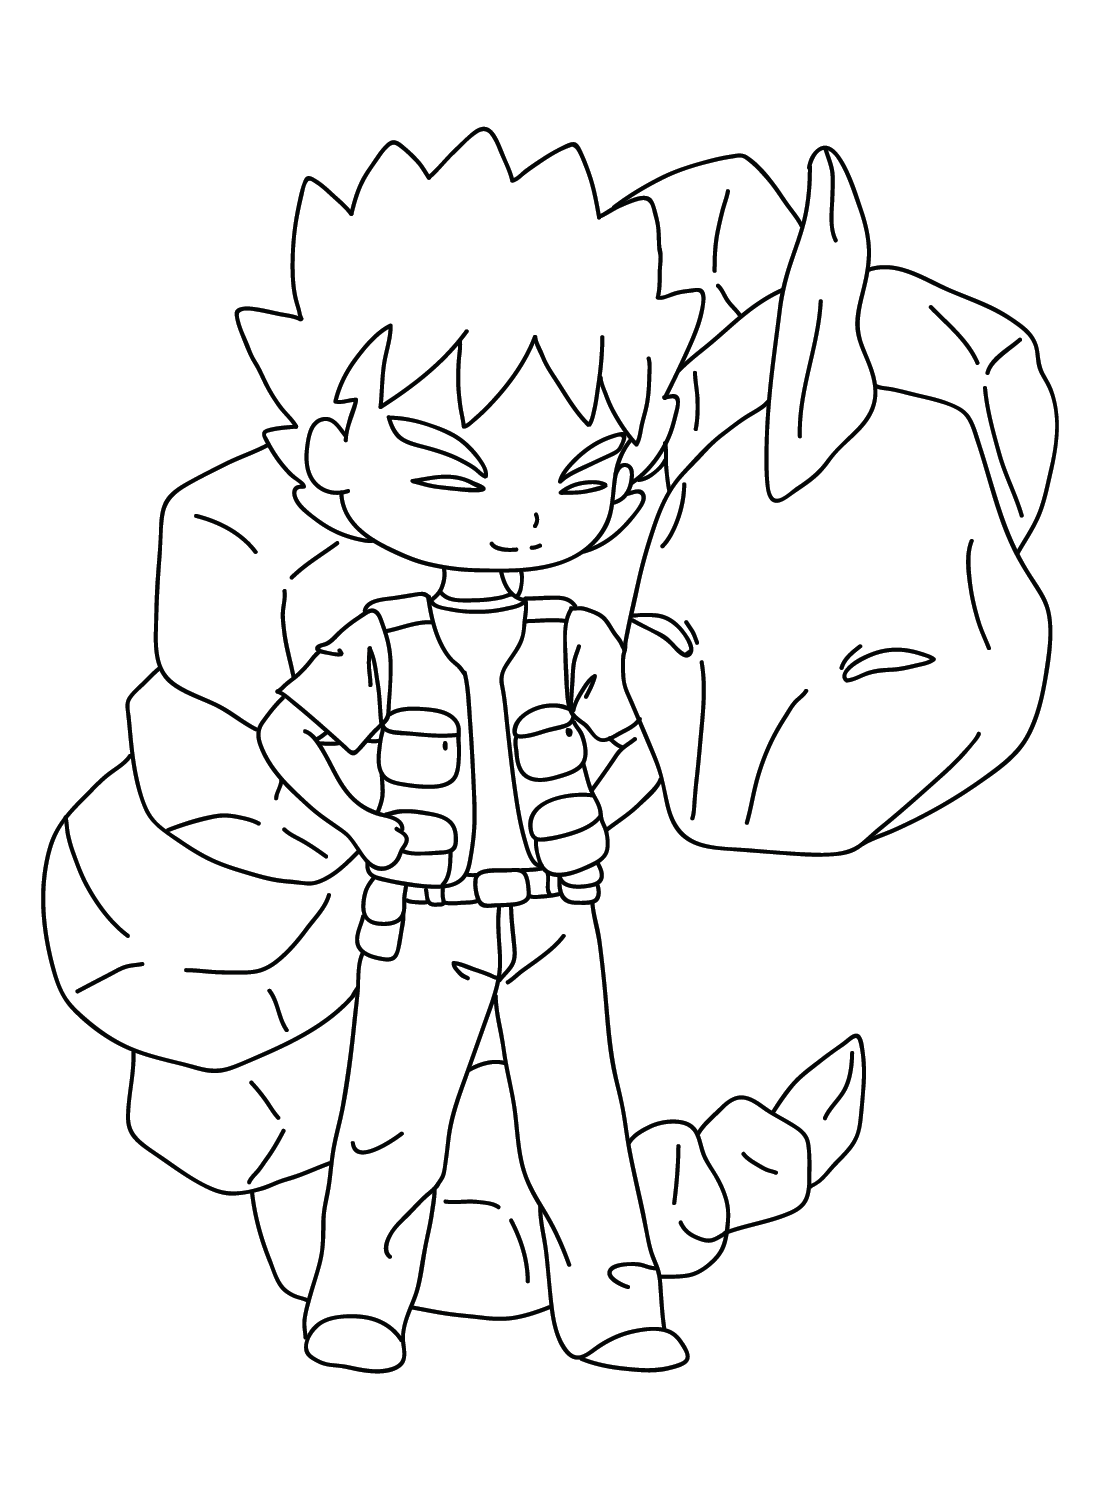 Chibi Brock Pokemon to Color from Brock